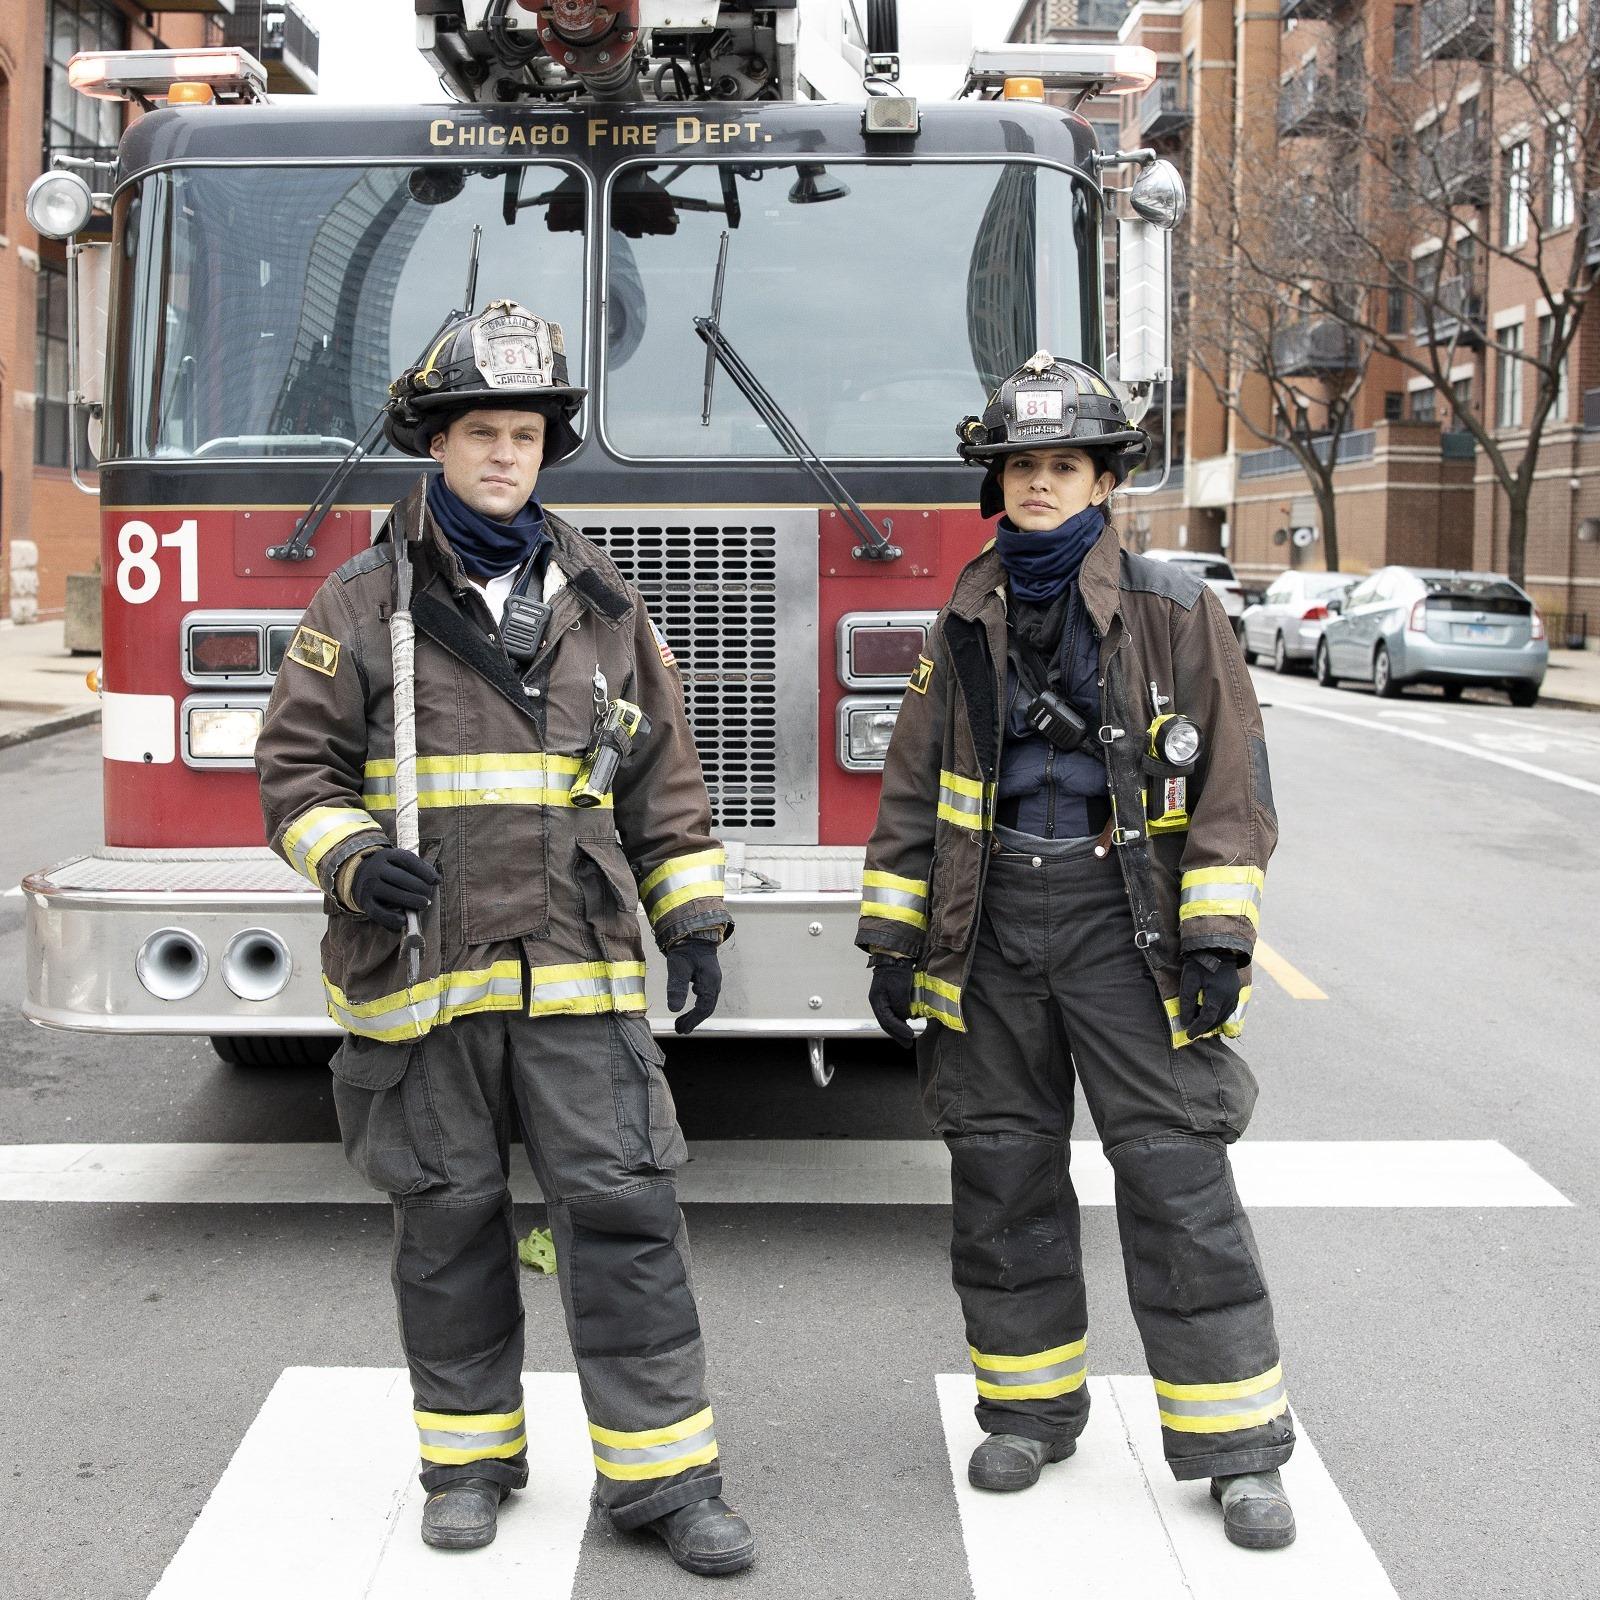 A photo showing Jesse Spencer and his co-star standing in front of a firetruck.